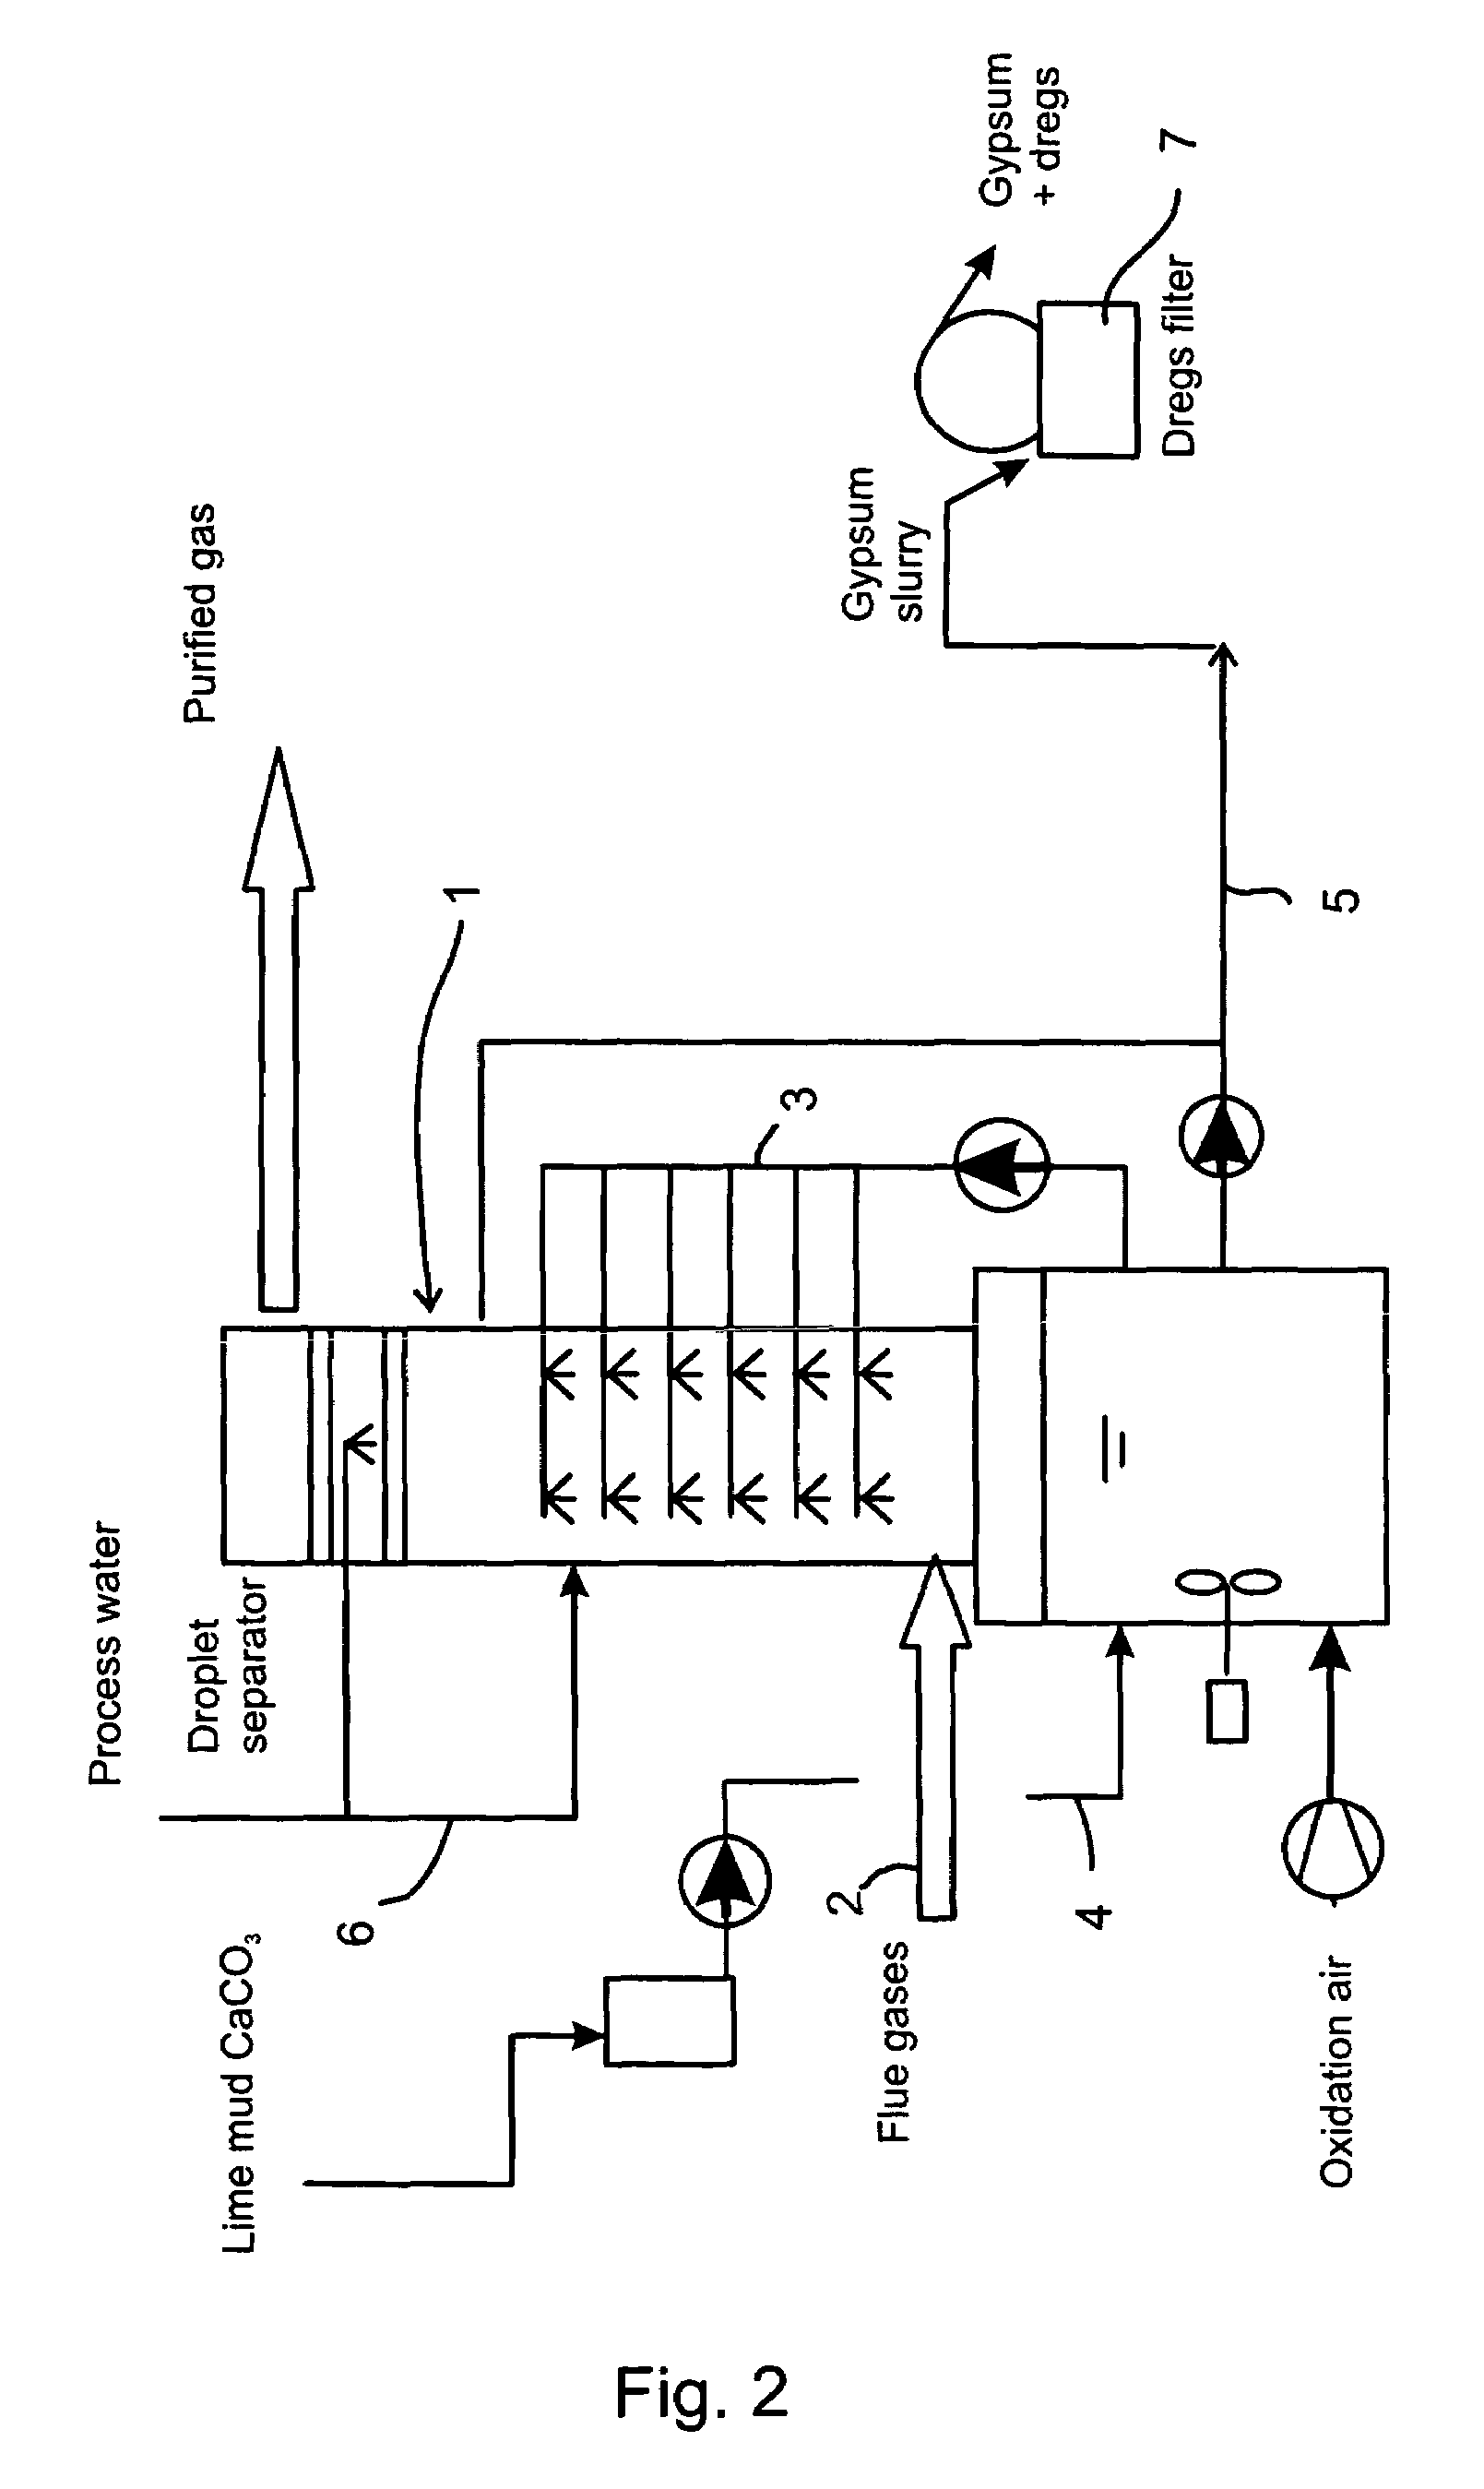 Method for processing flue gases